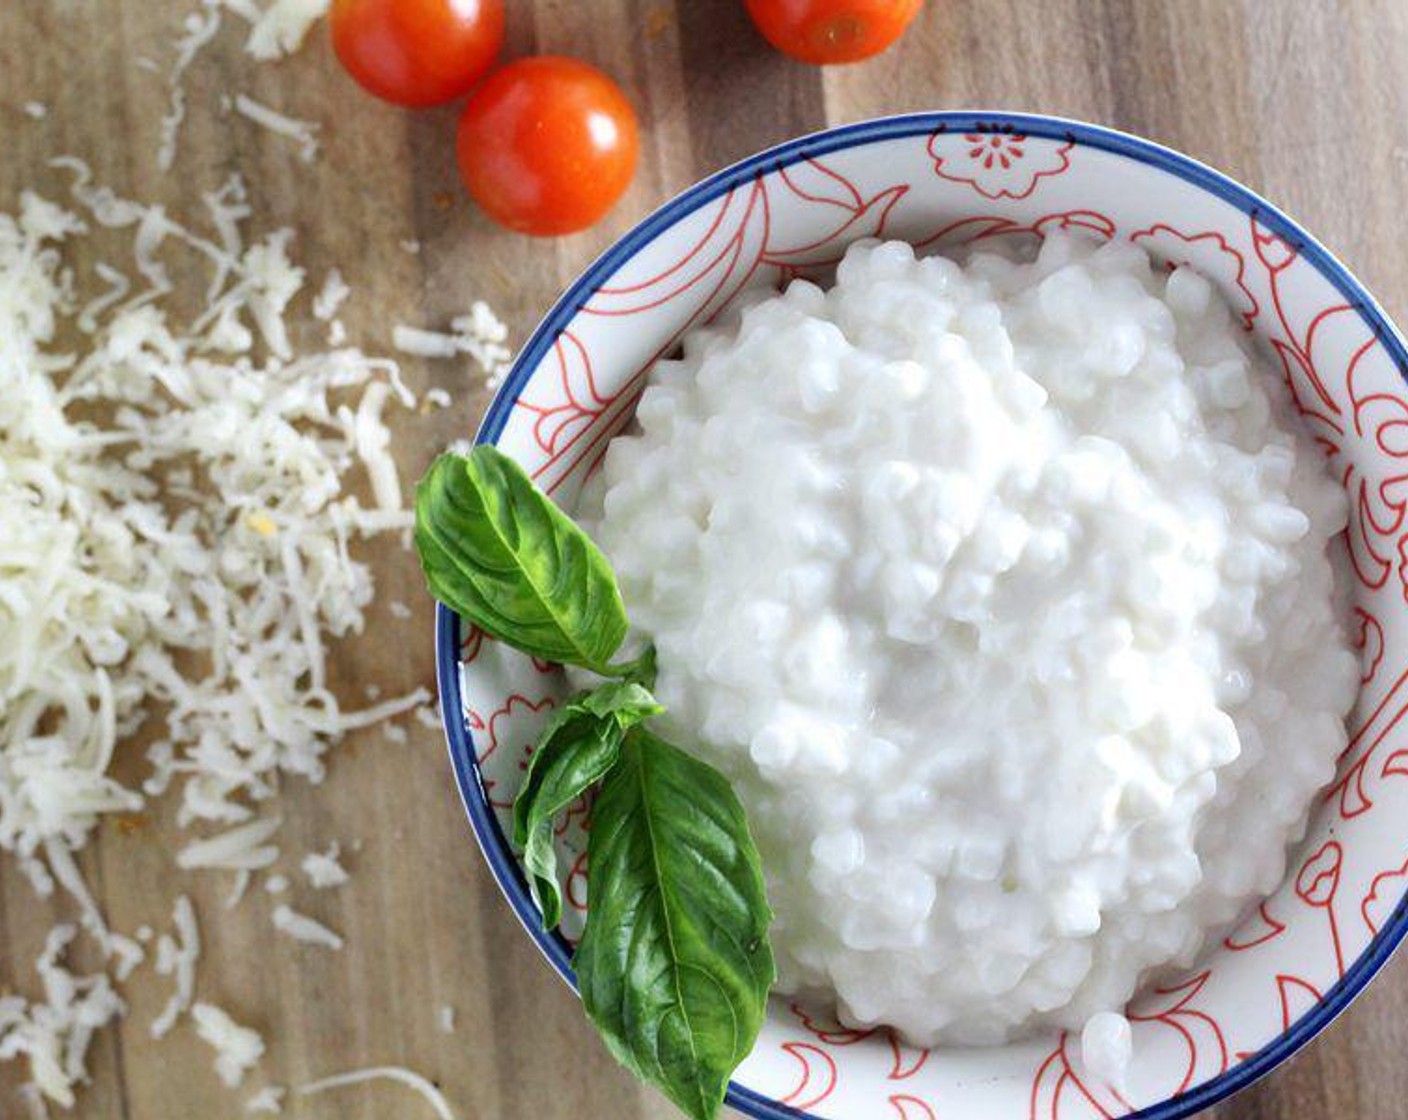 step 1 In a medium sized bowl, stir together the Cottage Cheese (1 cup), Mozzarella Cheese (1/3 cup), Philadelphia Original Soft Cheese (2 Tbsp), Ground Black Pepper (1/4 tsp), and Sea Salt (1/8 tsp).